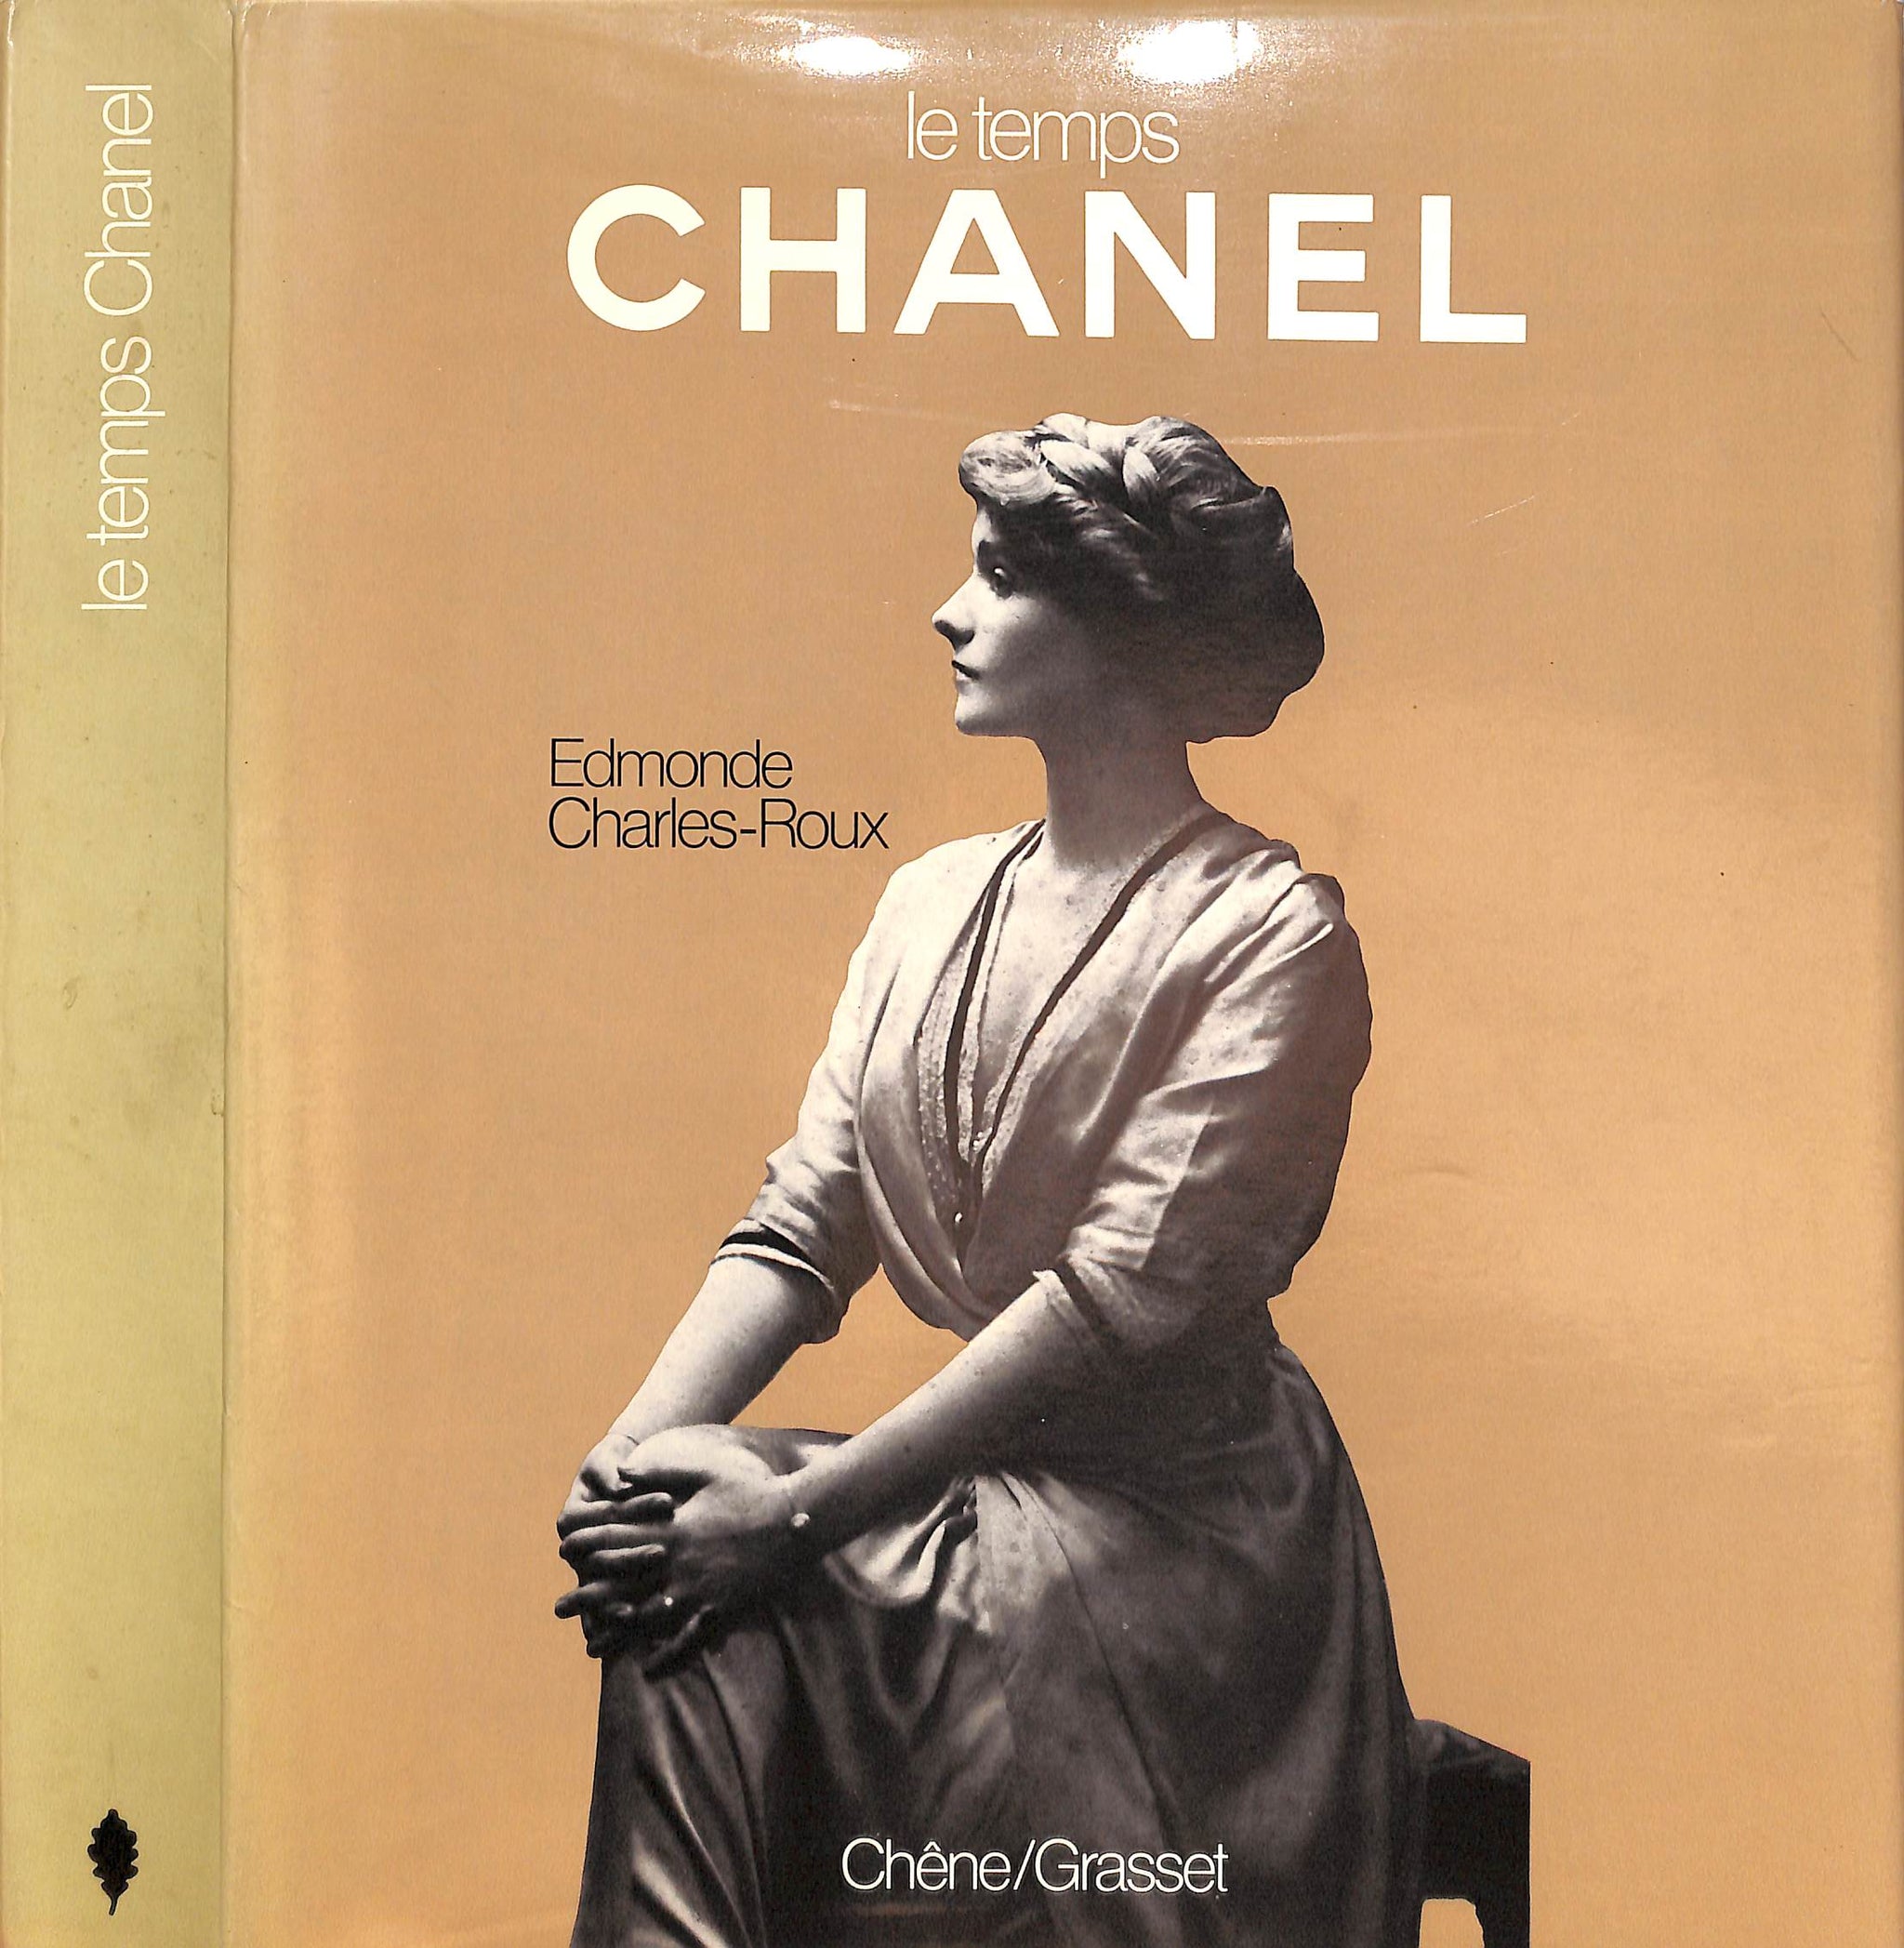 The world of Coco Chanel - Edmonde Charles-Roux